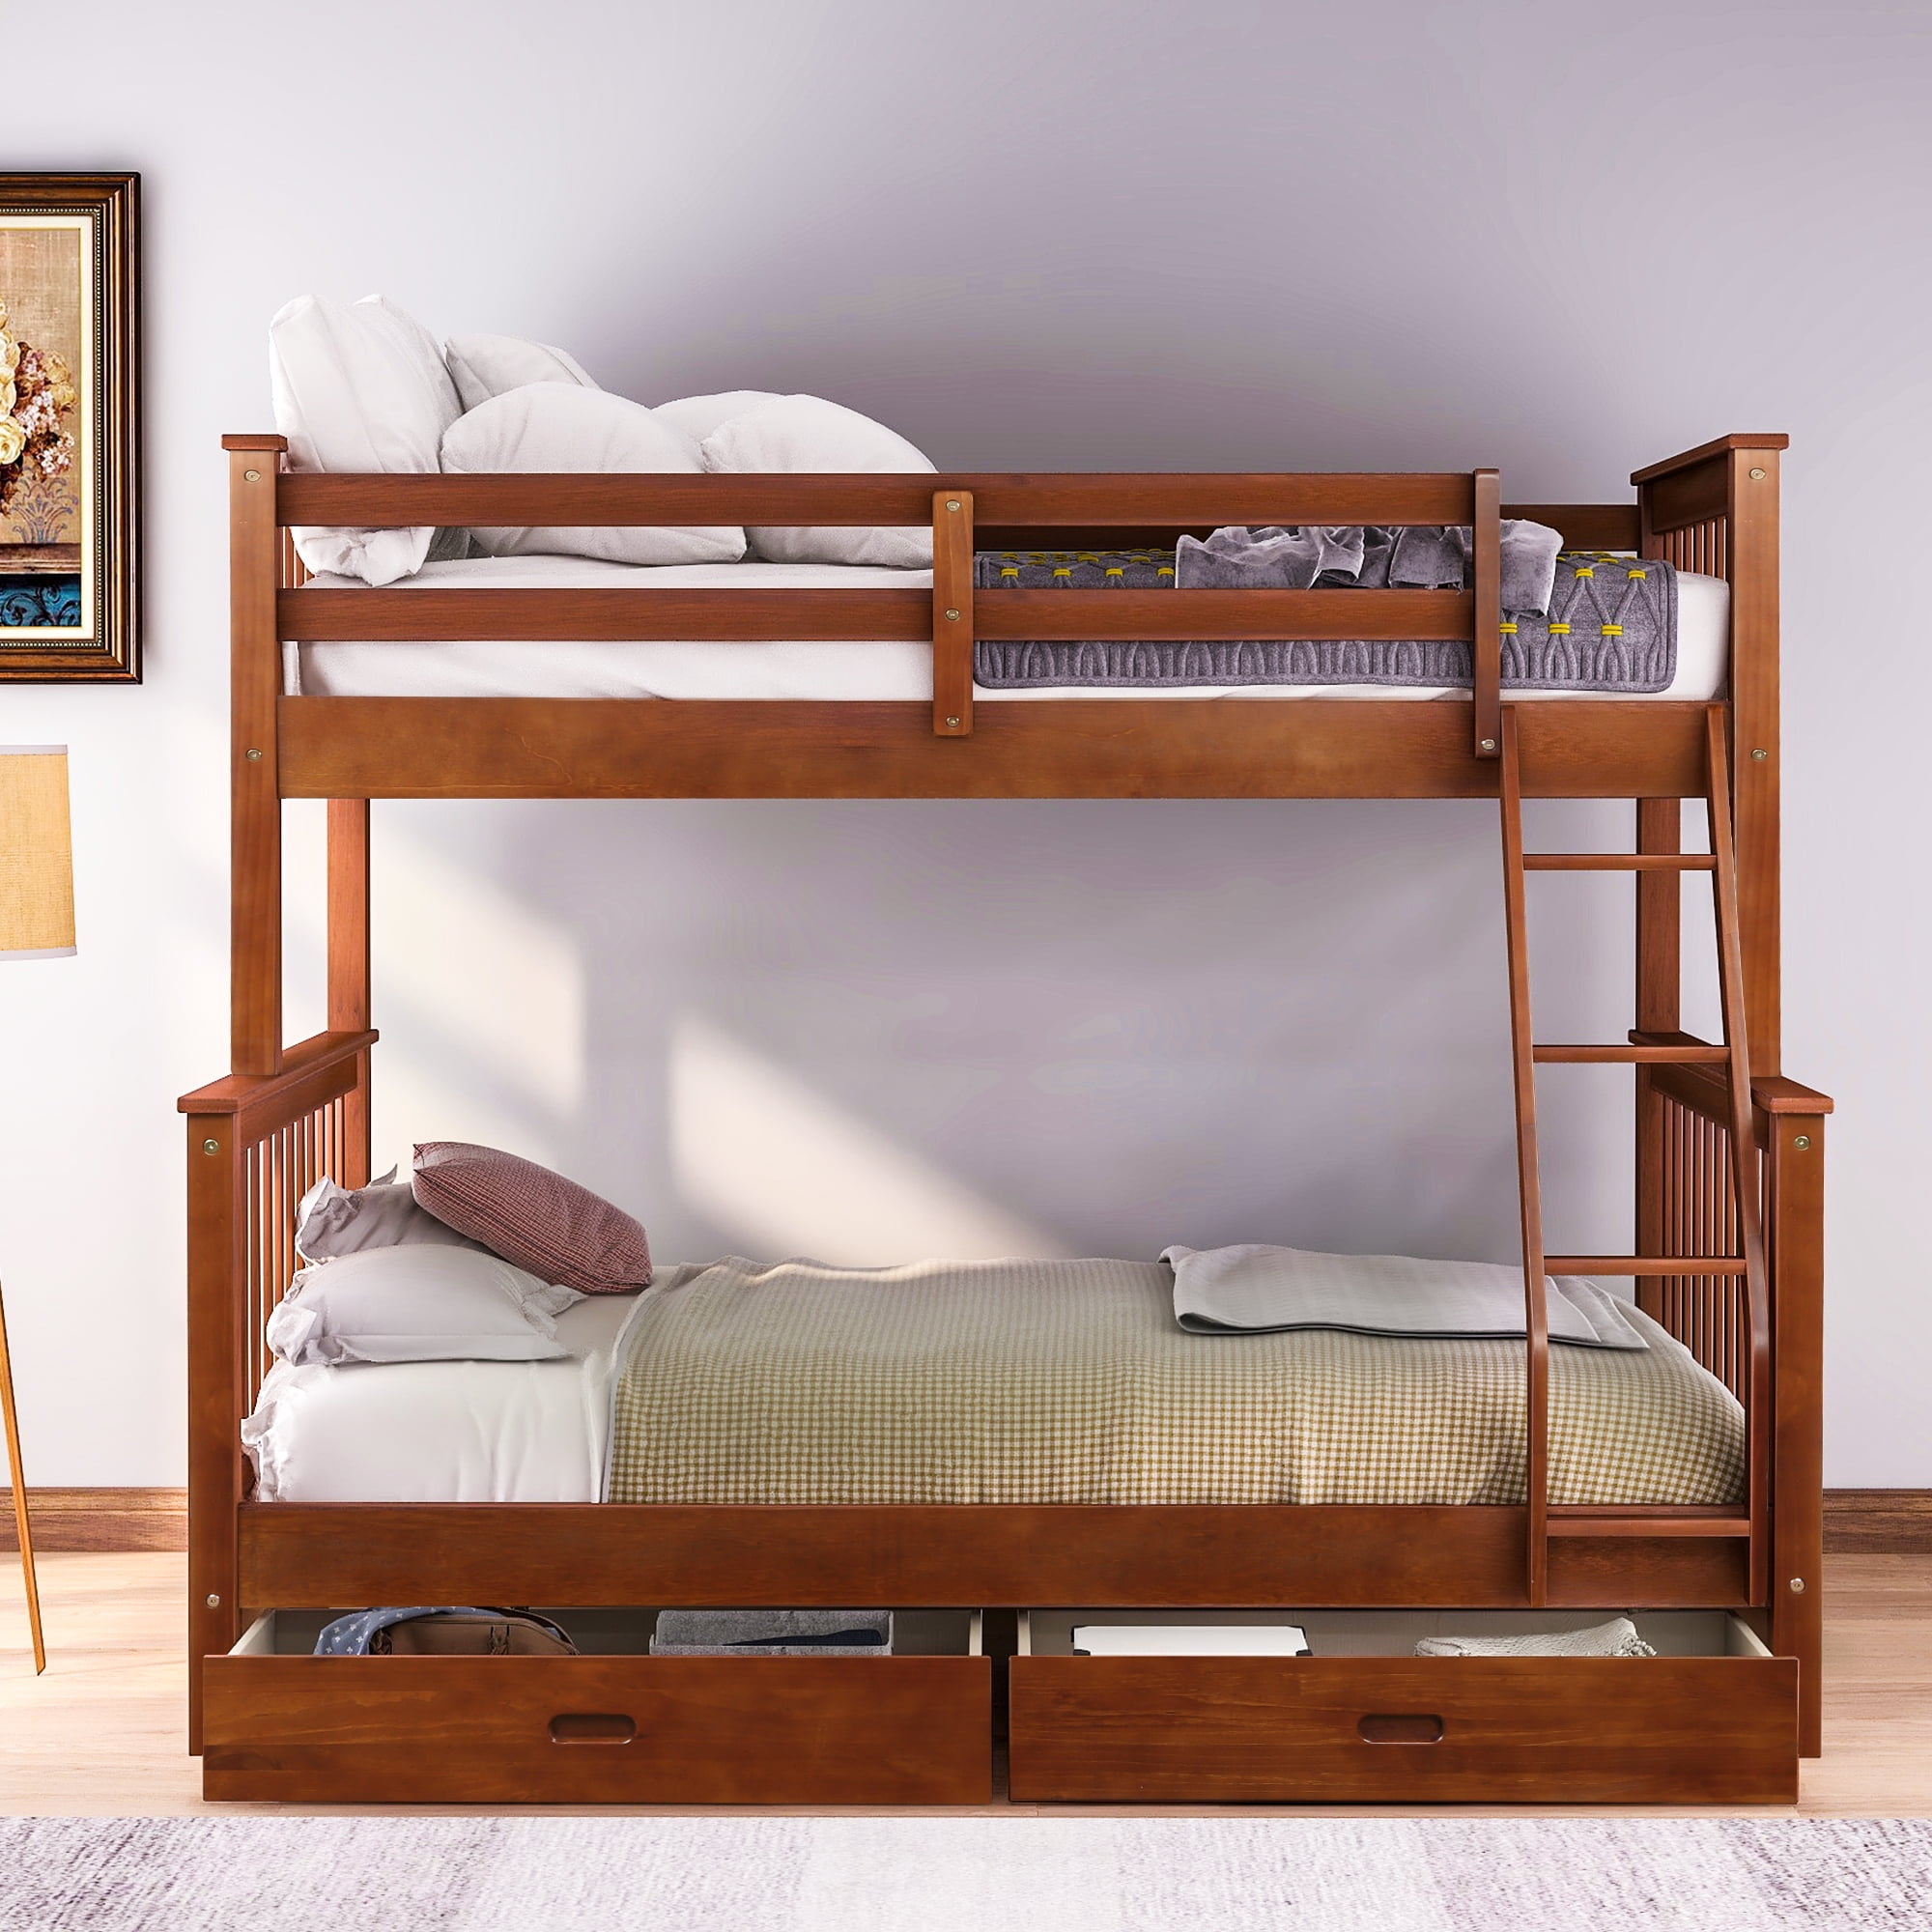 Twin Over Full Bunk Bed Frame Pretty, Twin Over Full Bunk Bed Ladder